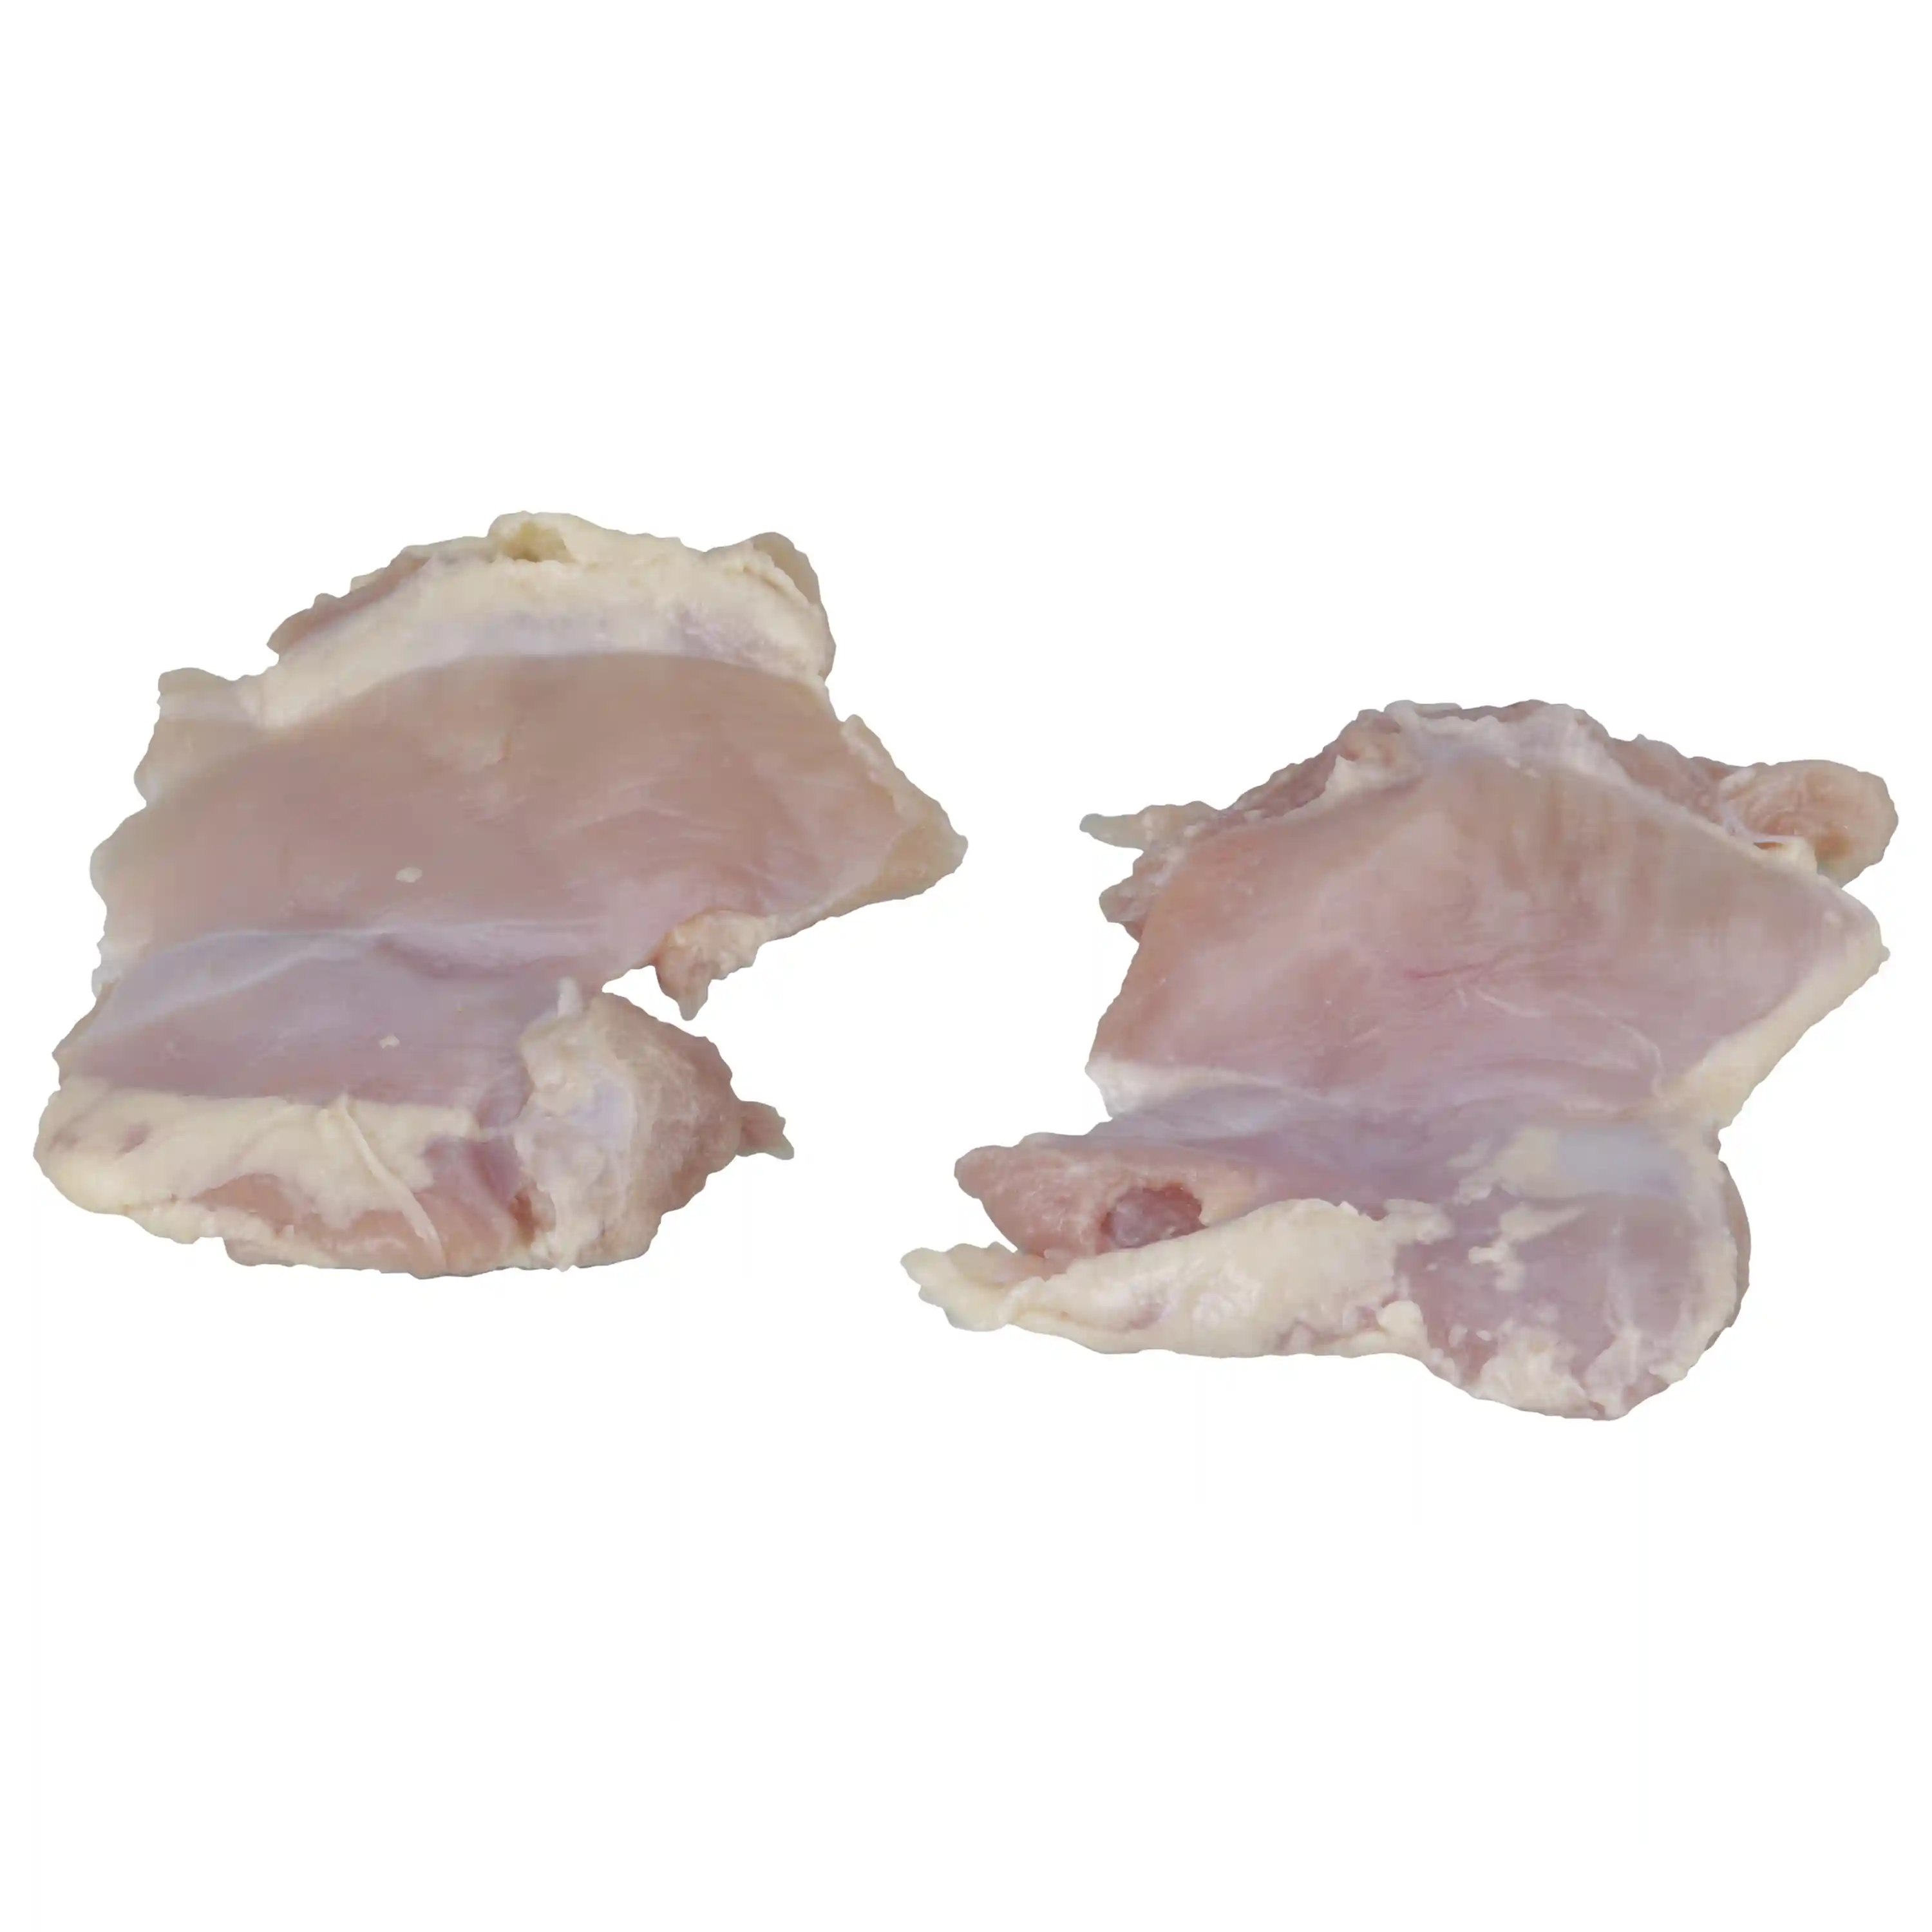 Tyson® Uncooked Unbreaded Boneless Skinless Chicken Thigh Filets_image_11